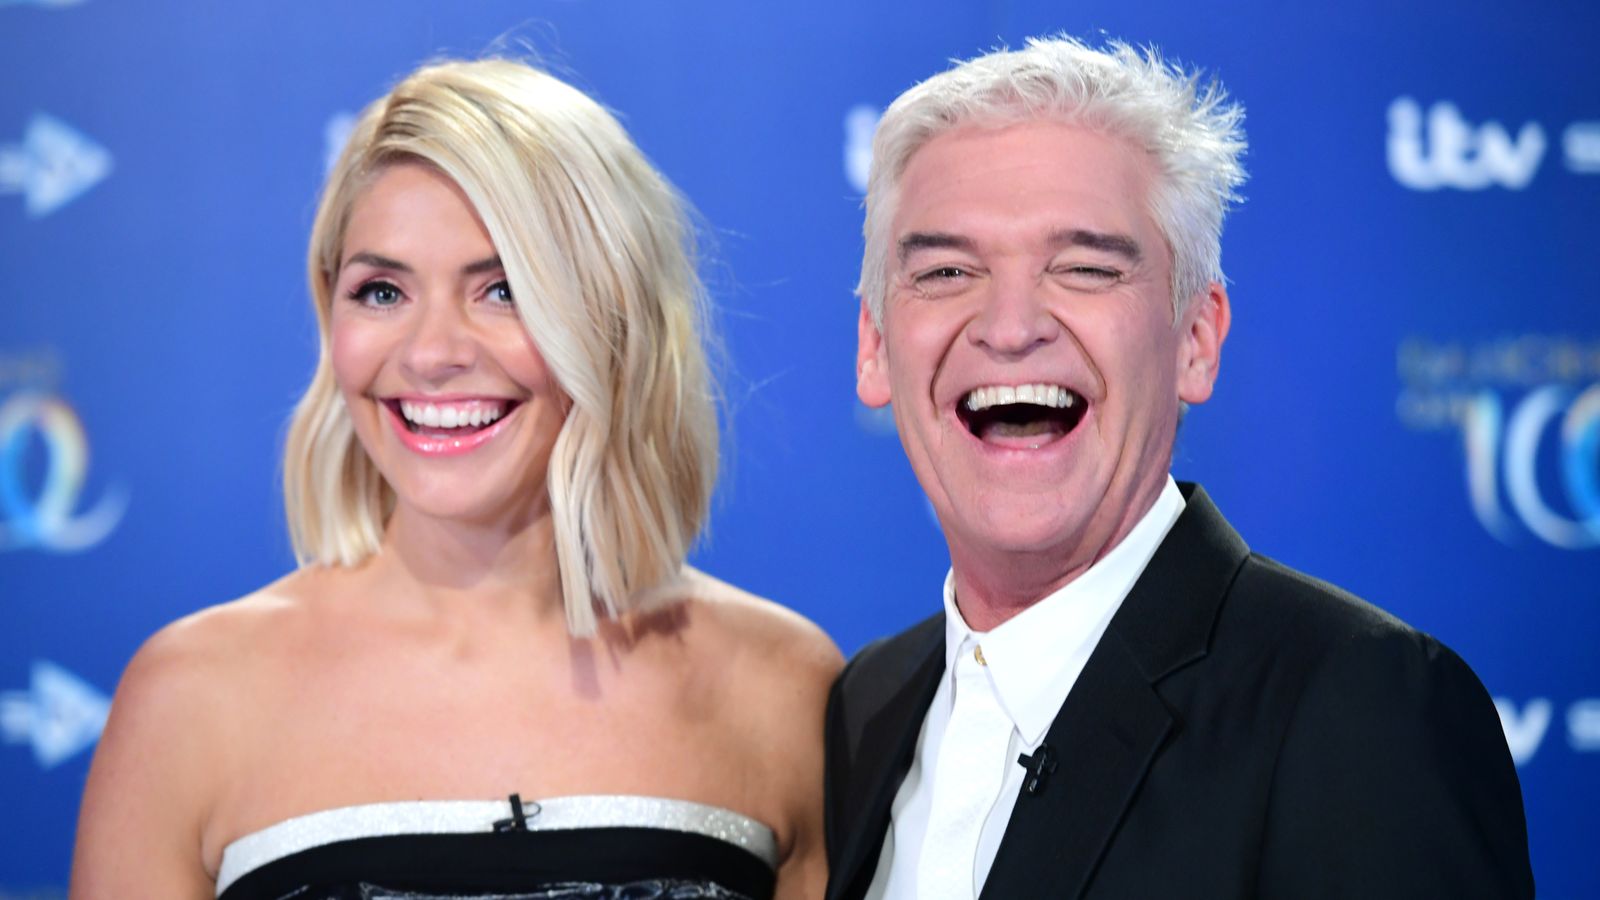 Phillip Schofield steps down from This Morning: His statement in full - and Holly Willoughby's response